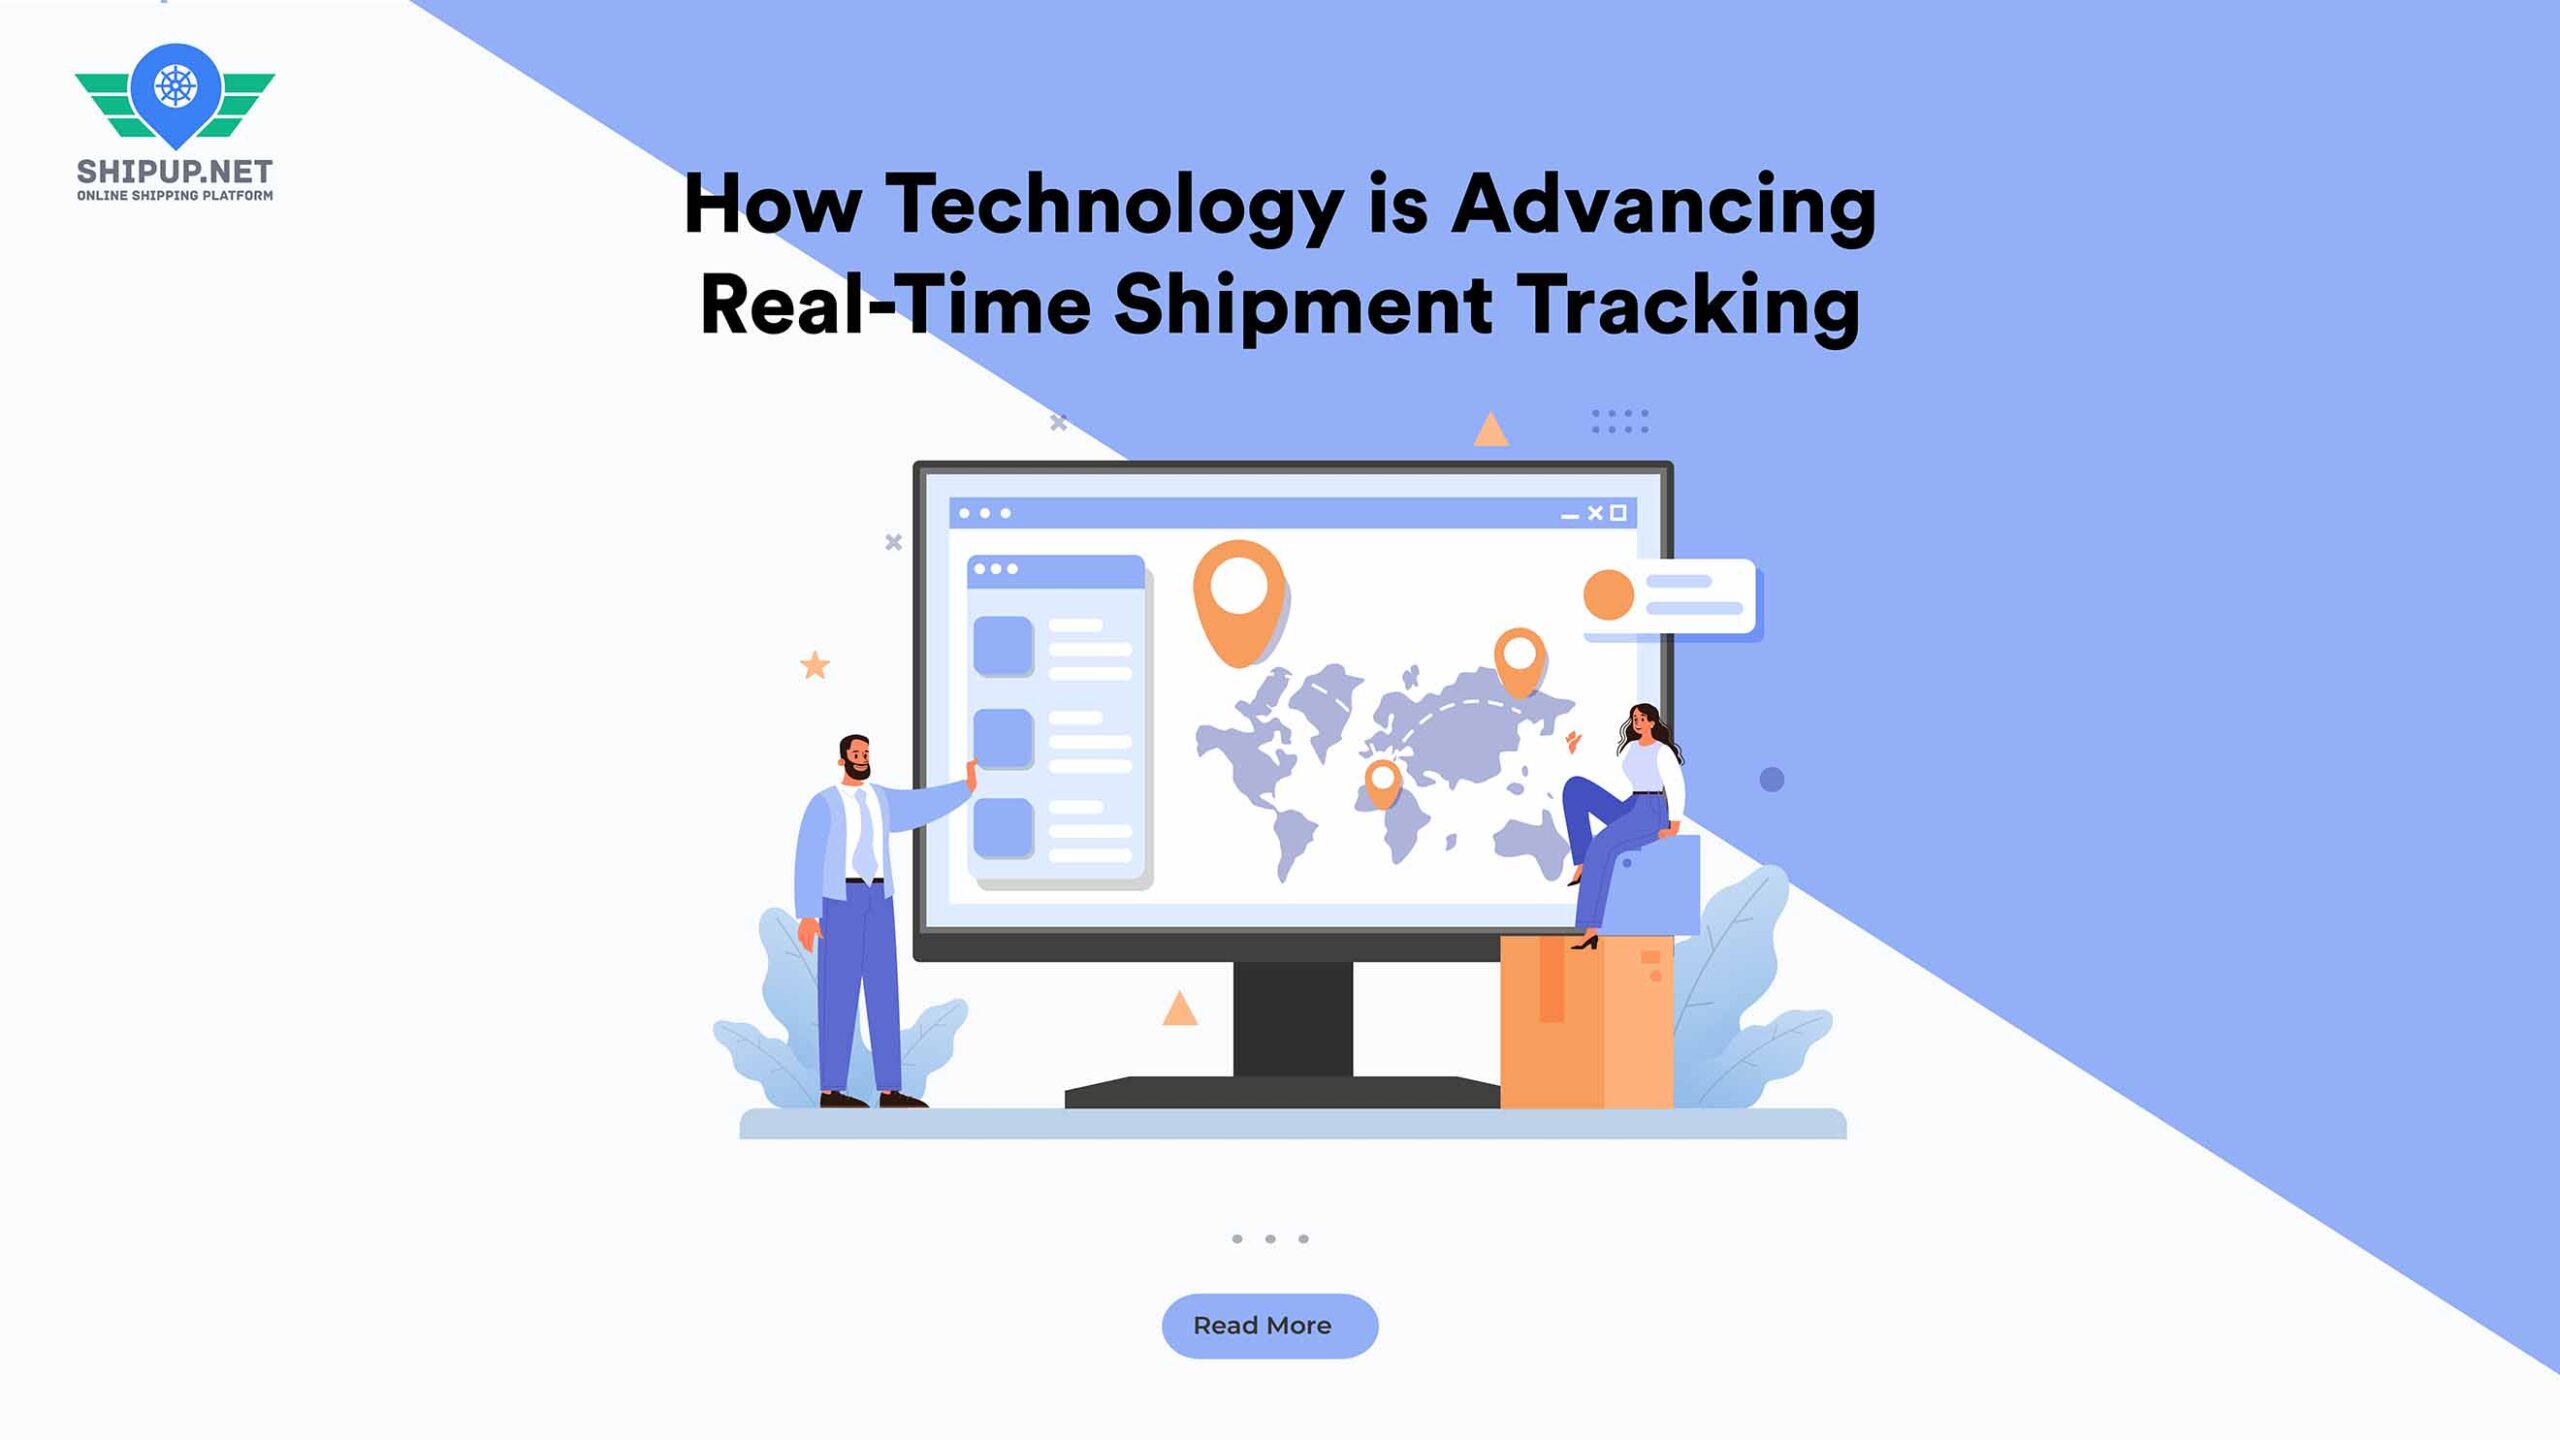 How Technology is Advancing Real-Time Shipment Tracking